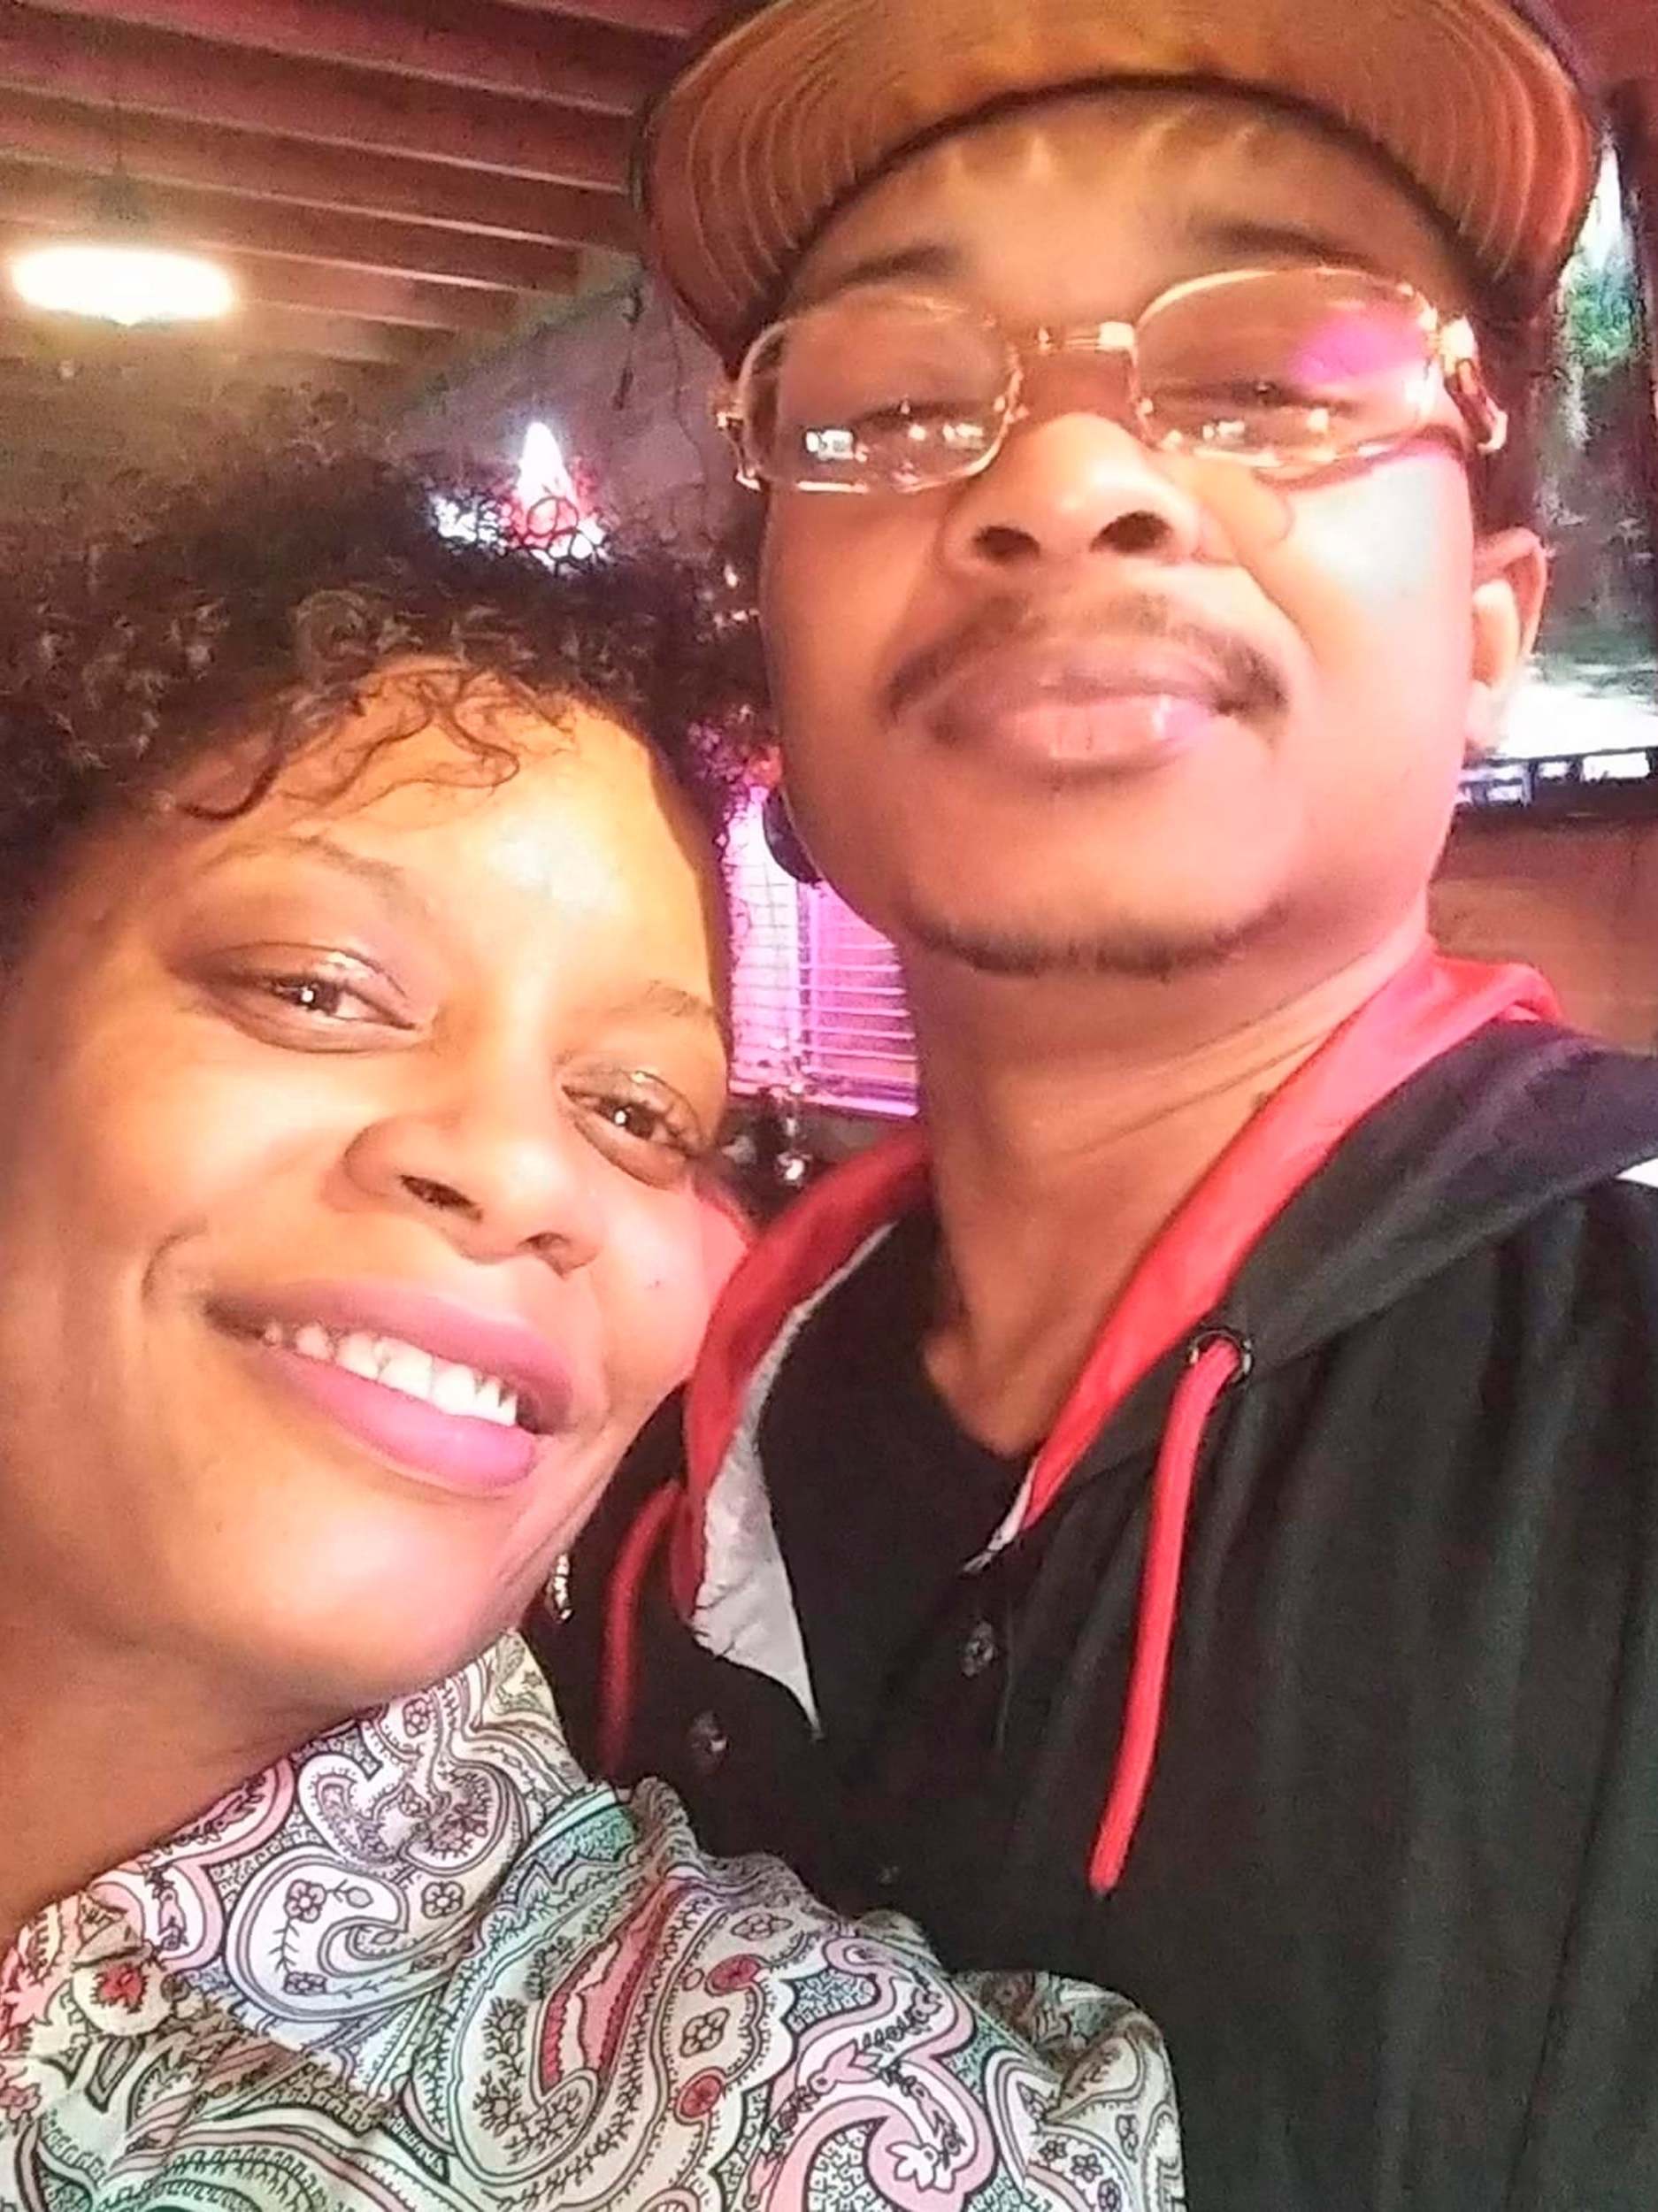 Adria-Joi Watkins poses with her second cousin Jacob Blake in a photograph taken in September 2019